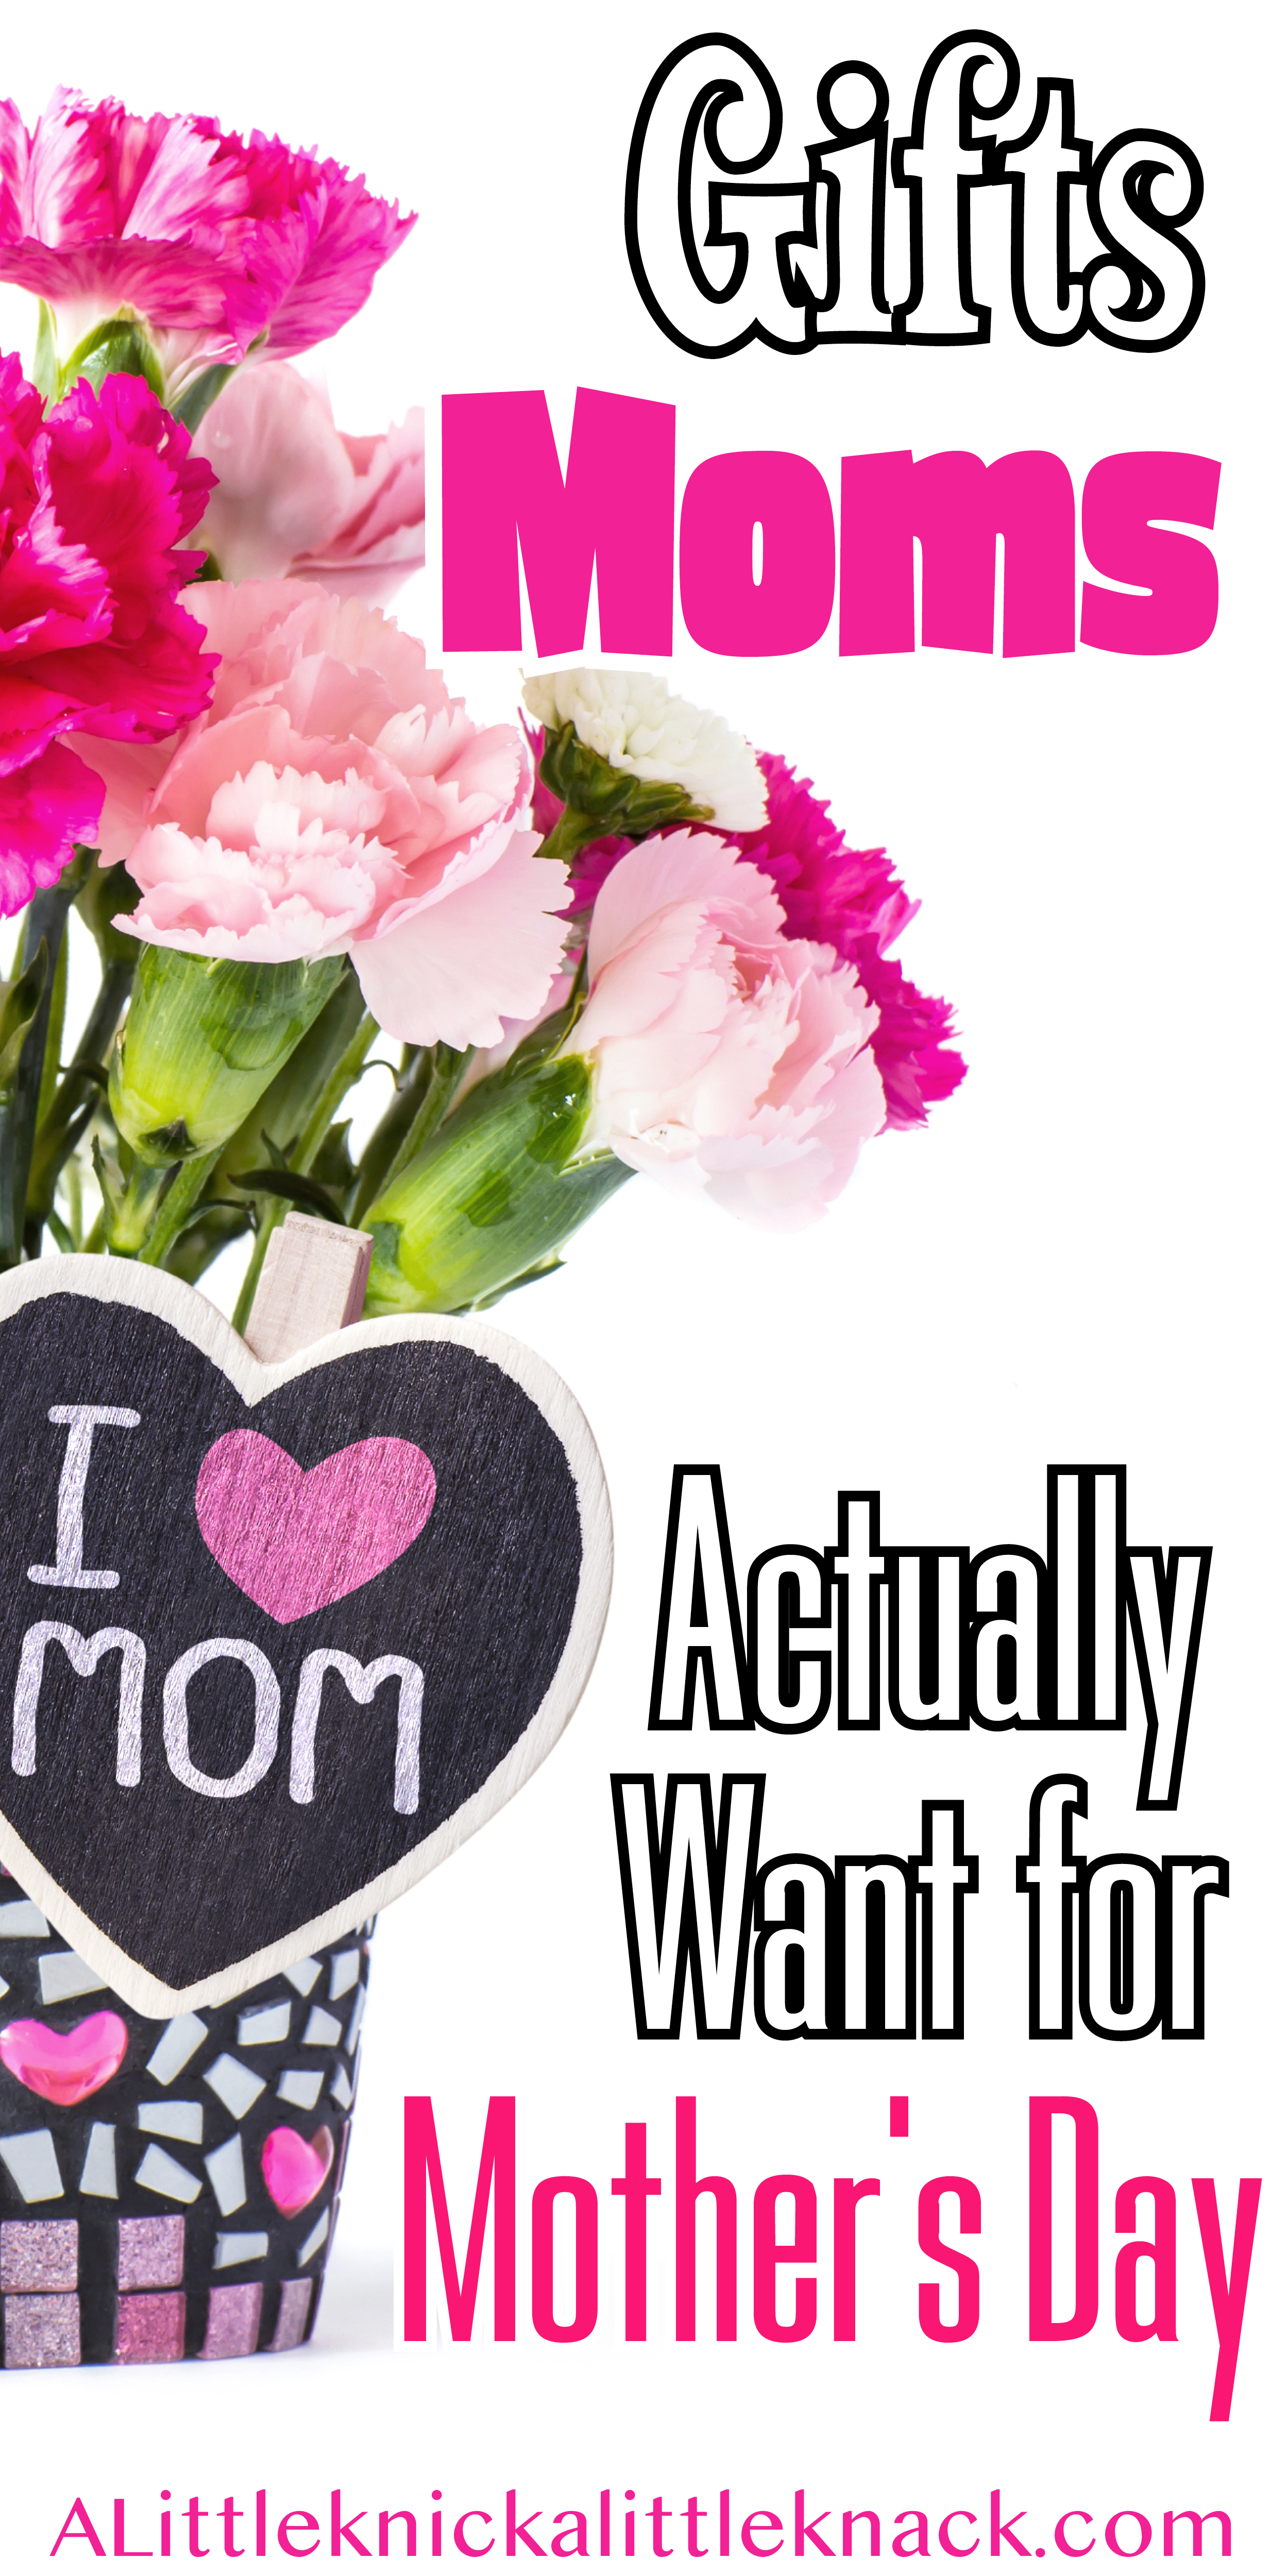 Pink carnations in a I love mom mosaic flower pot with a text overlay 